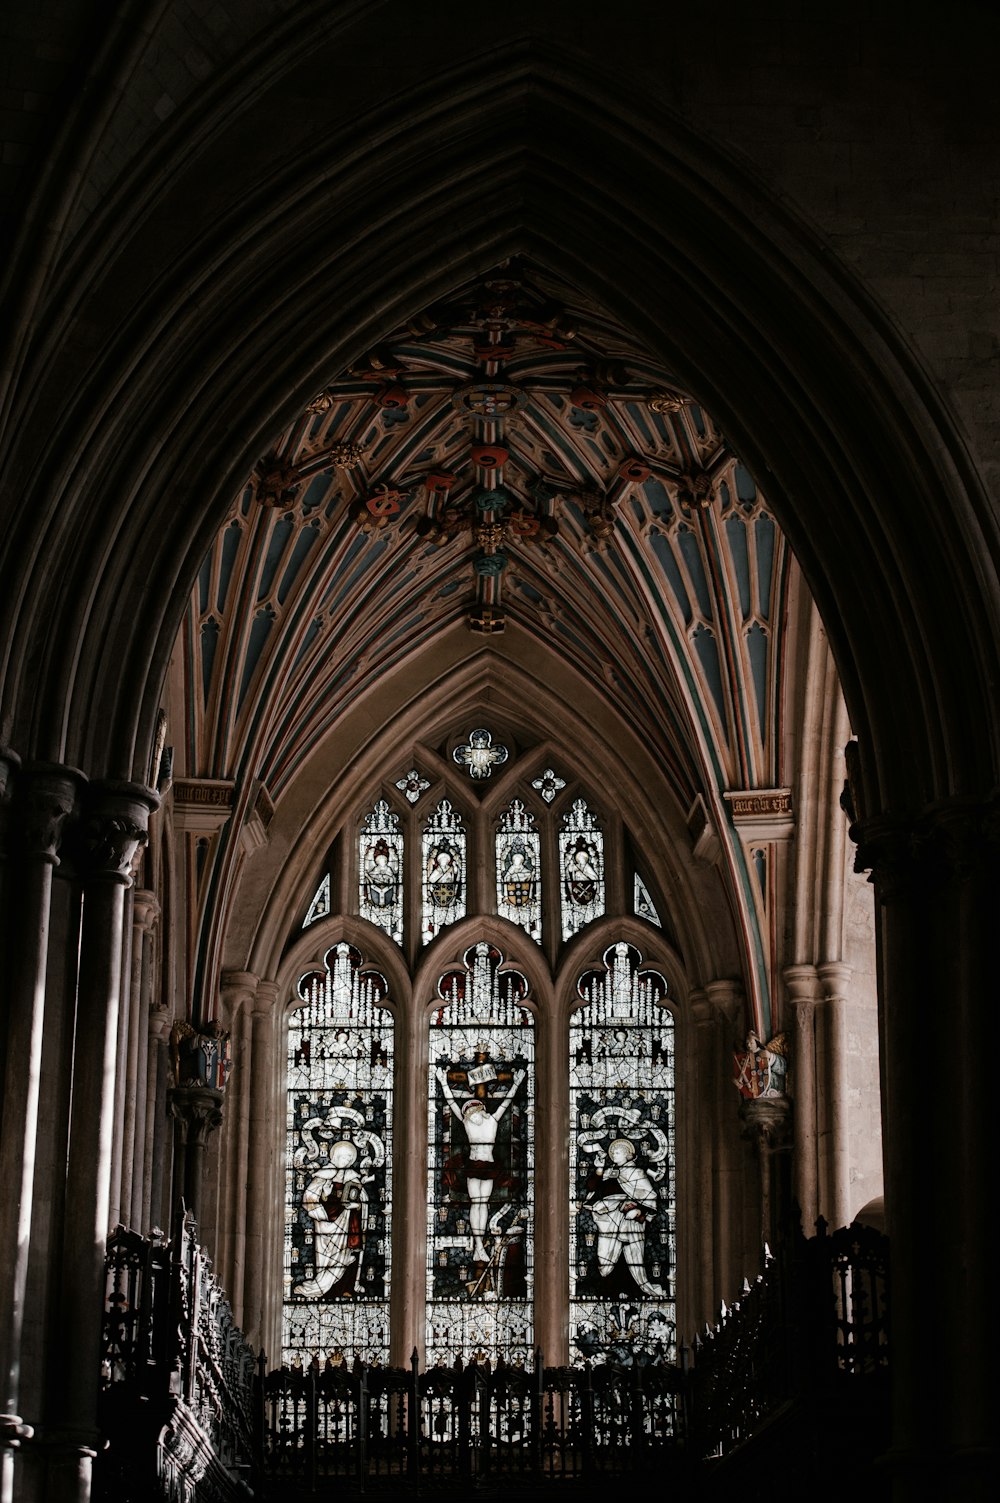 person took a photo inside cathedral